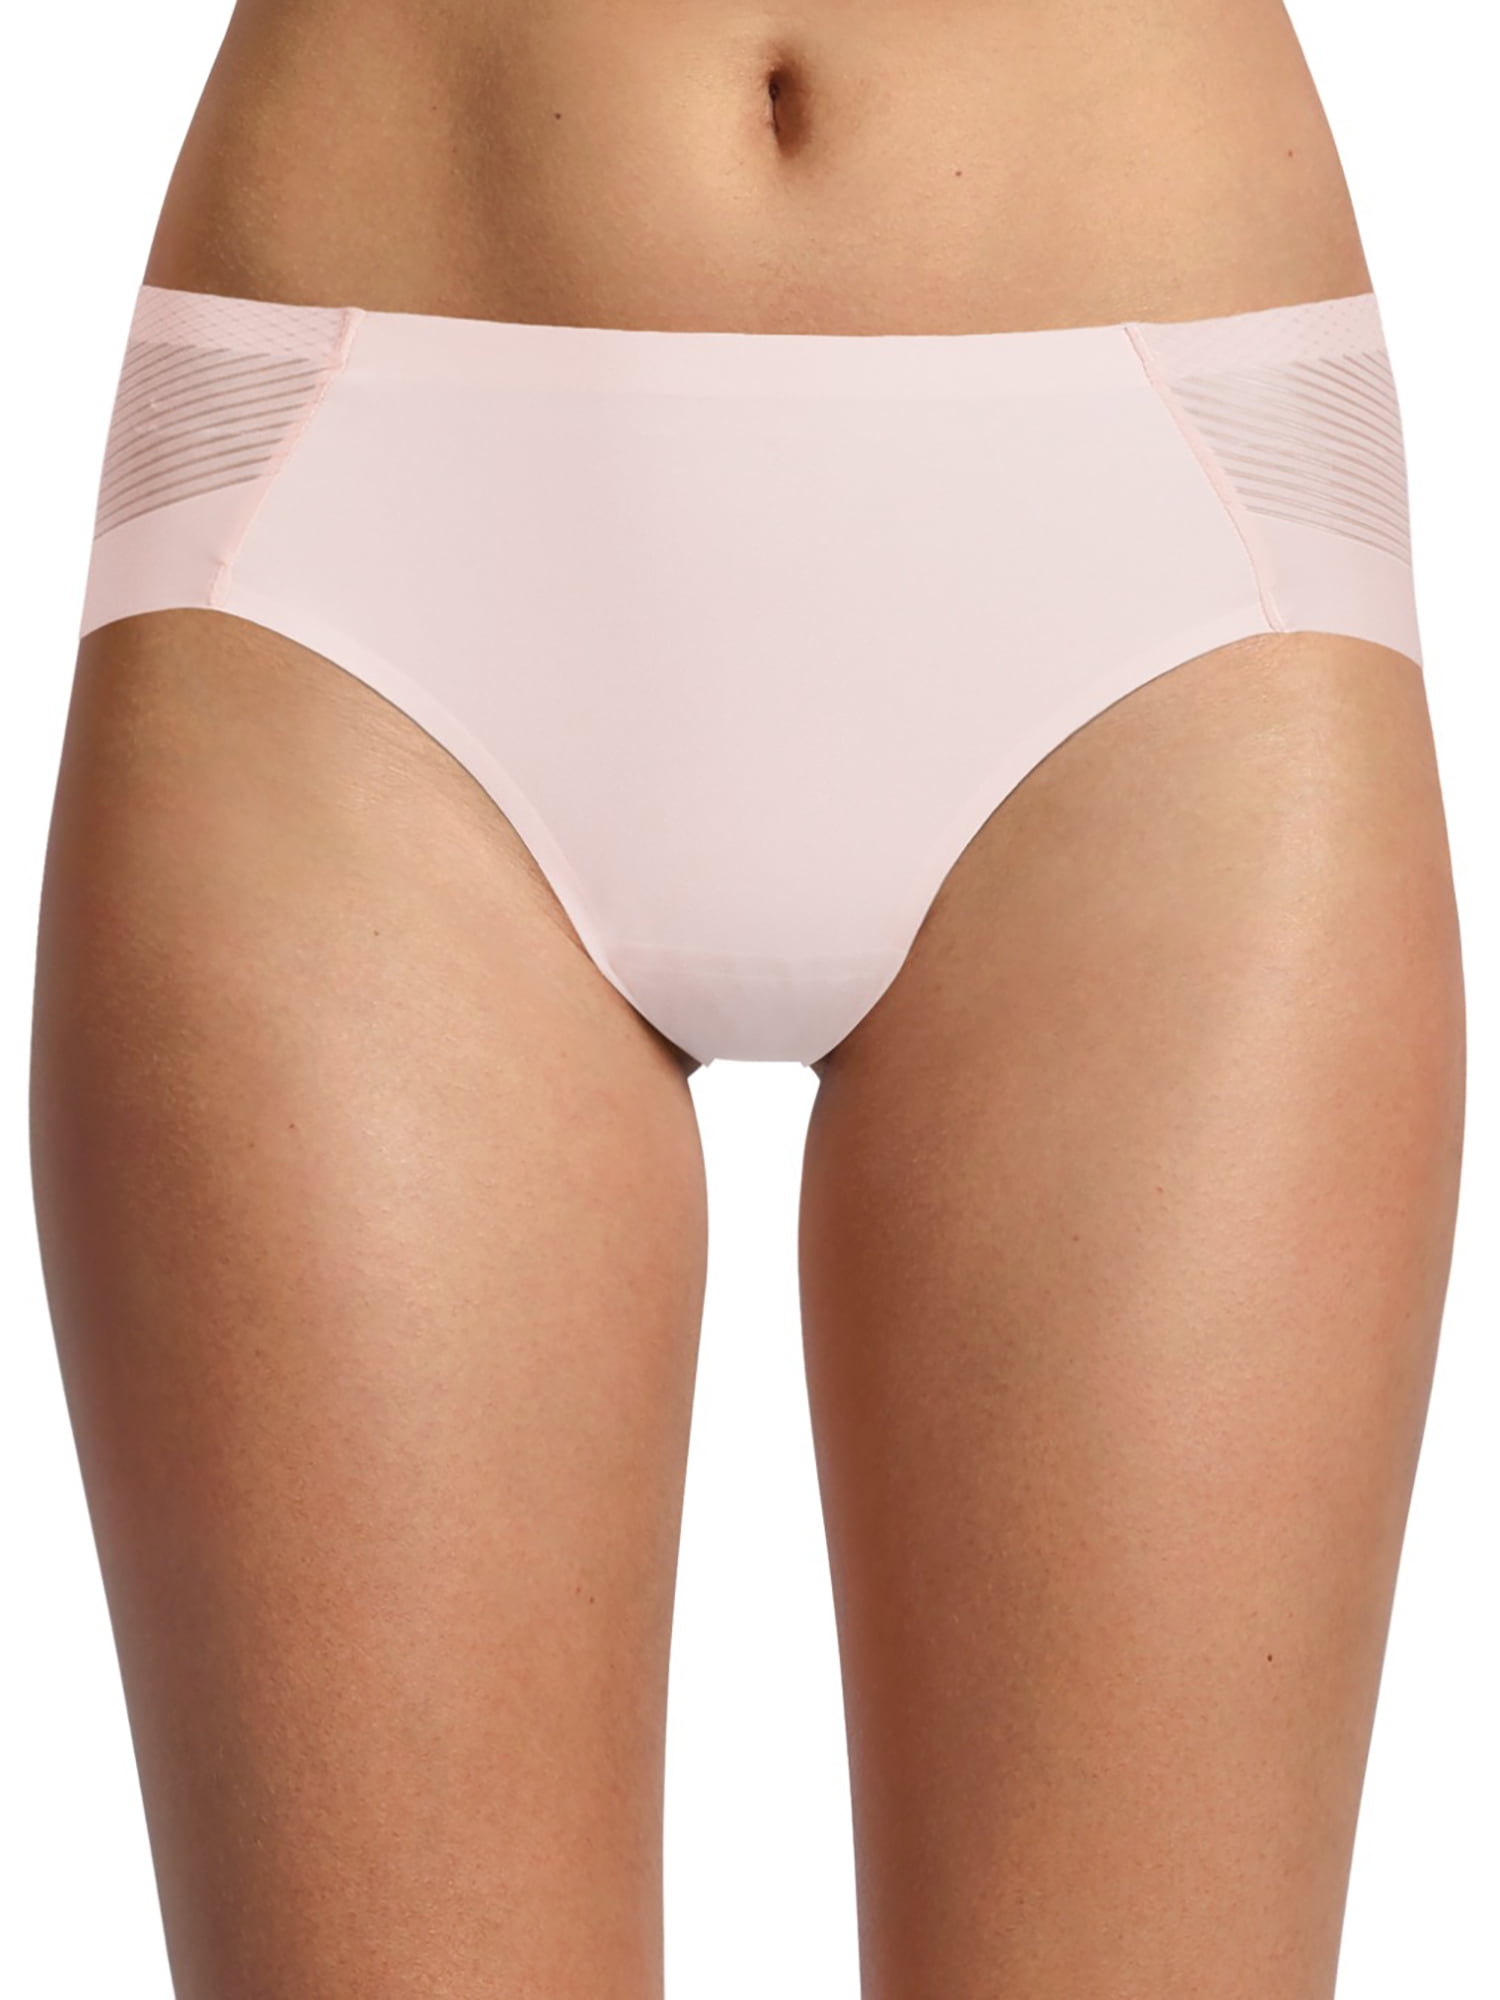 Yummie Polyester Panties for Women